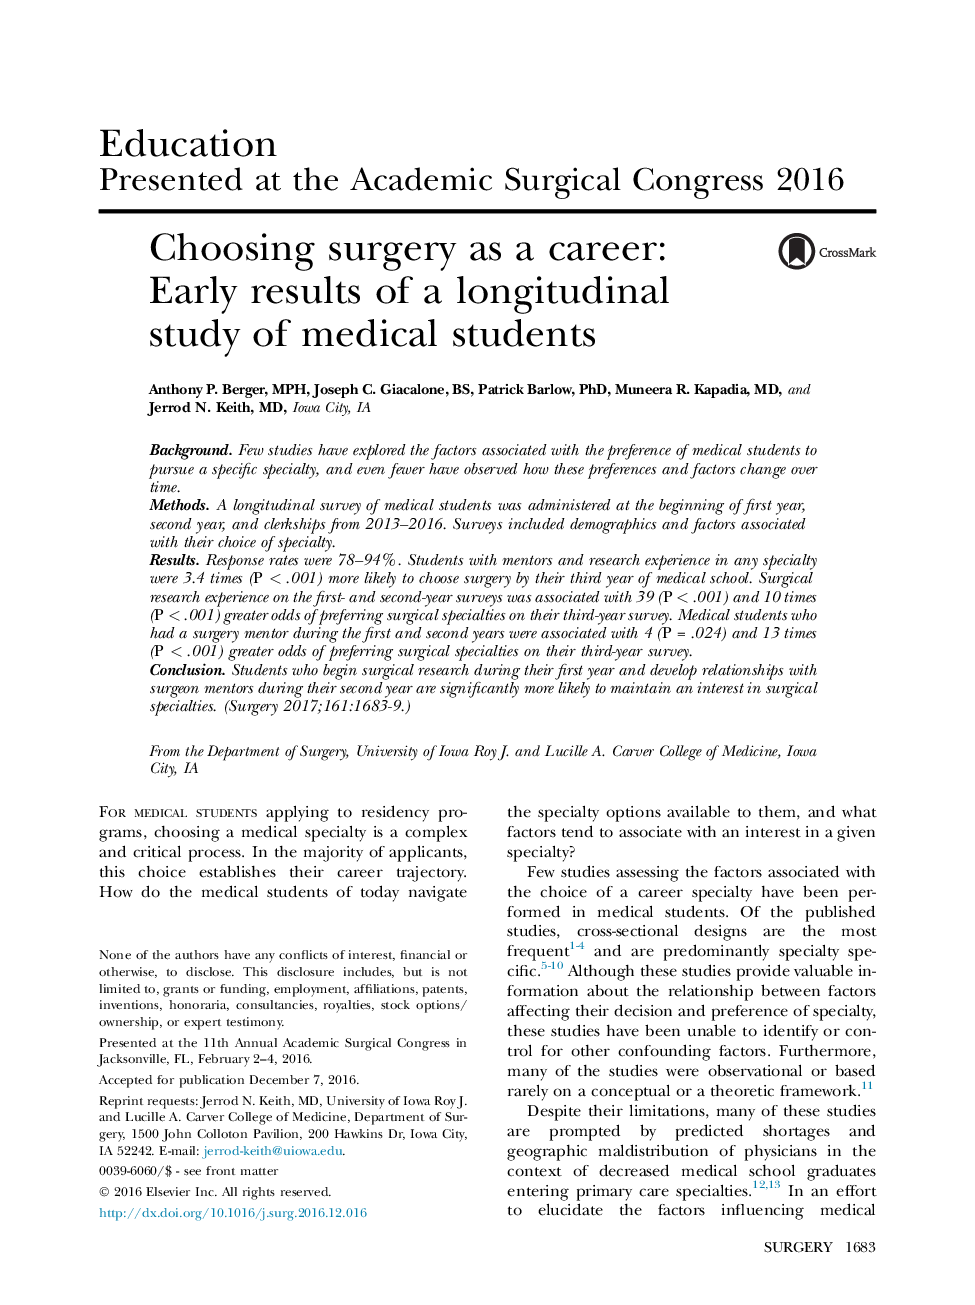 Choosing surgery as a career: Early results of a longitudinal study of medical students